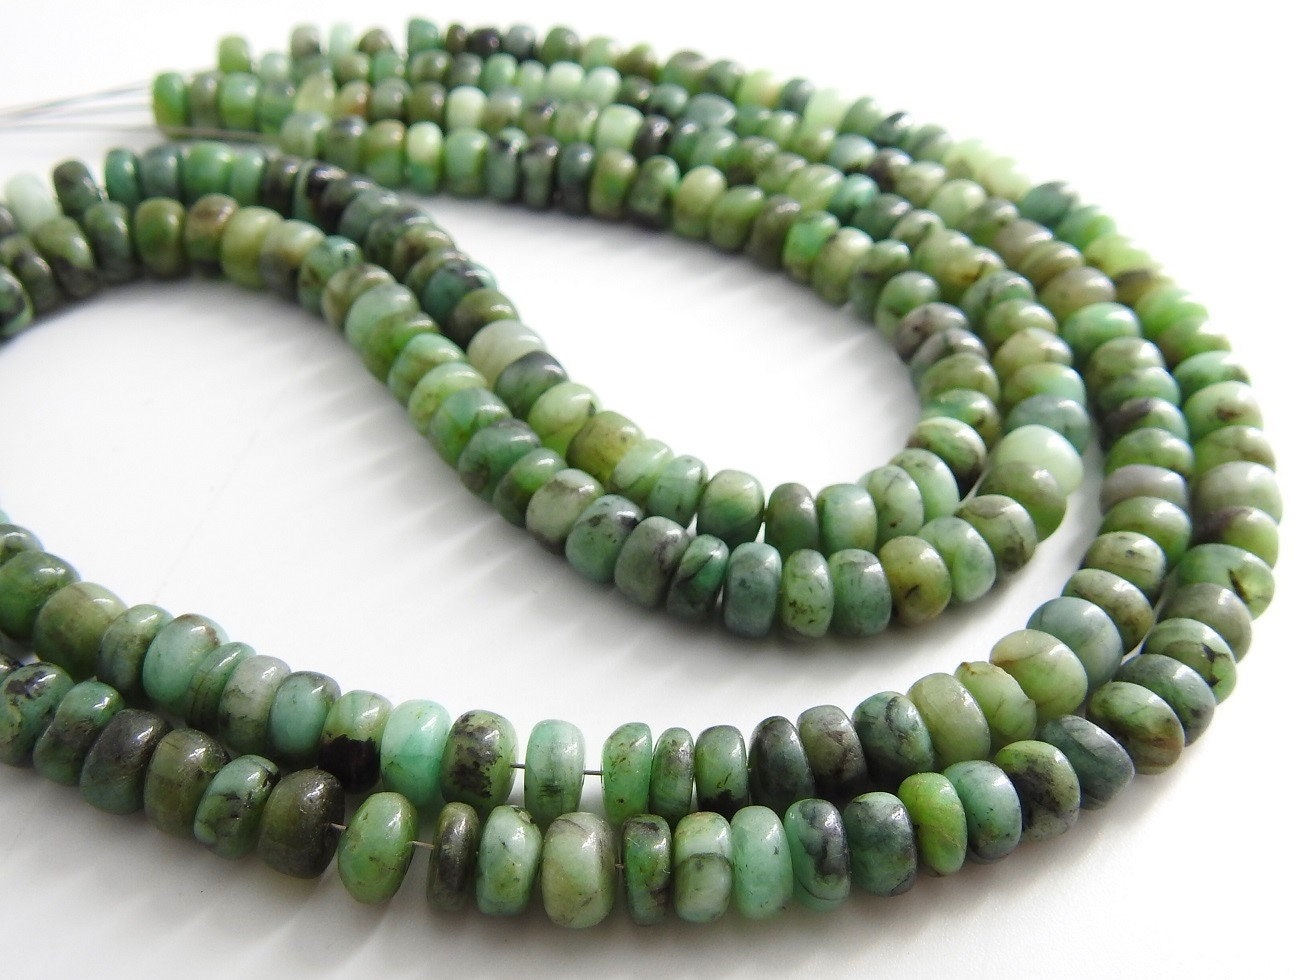 Emerald Smooth Roundel Bead,Shaded,Loose Stone,Handmade,Wholesale Price,New Arrival,18Inch Strand 100%Natural PME(B12) | Save 33% - Rajasthan Living 14